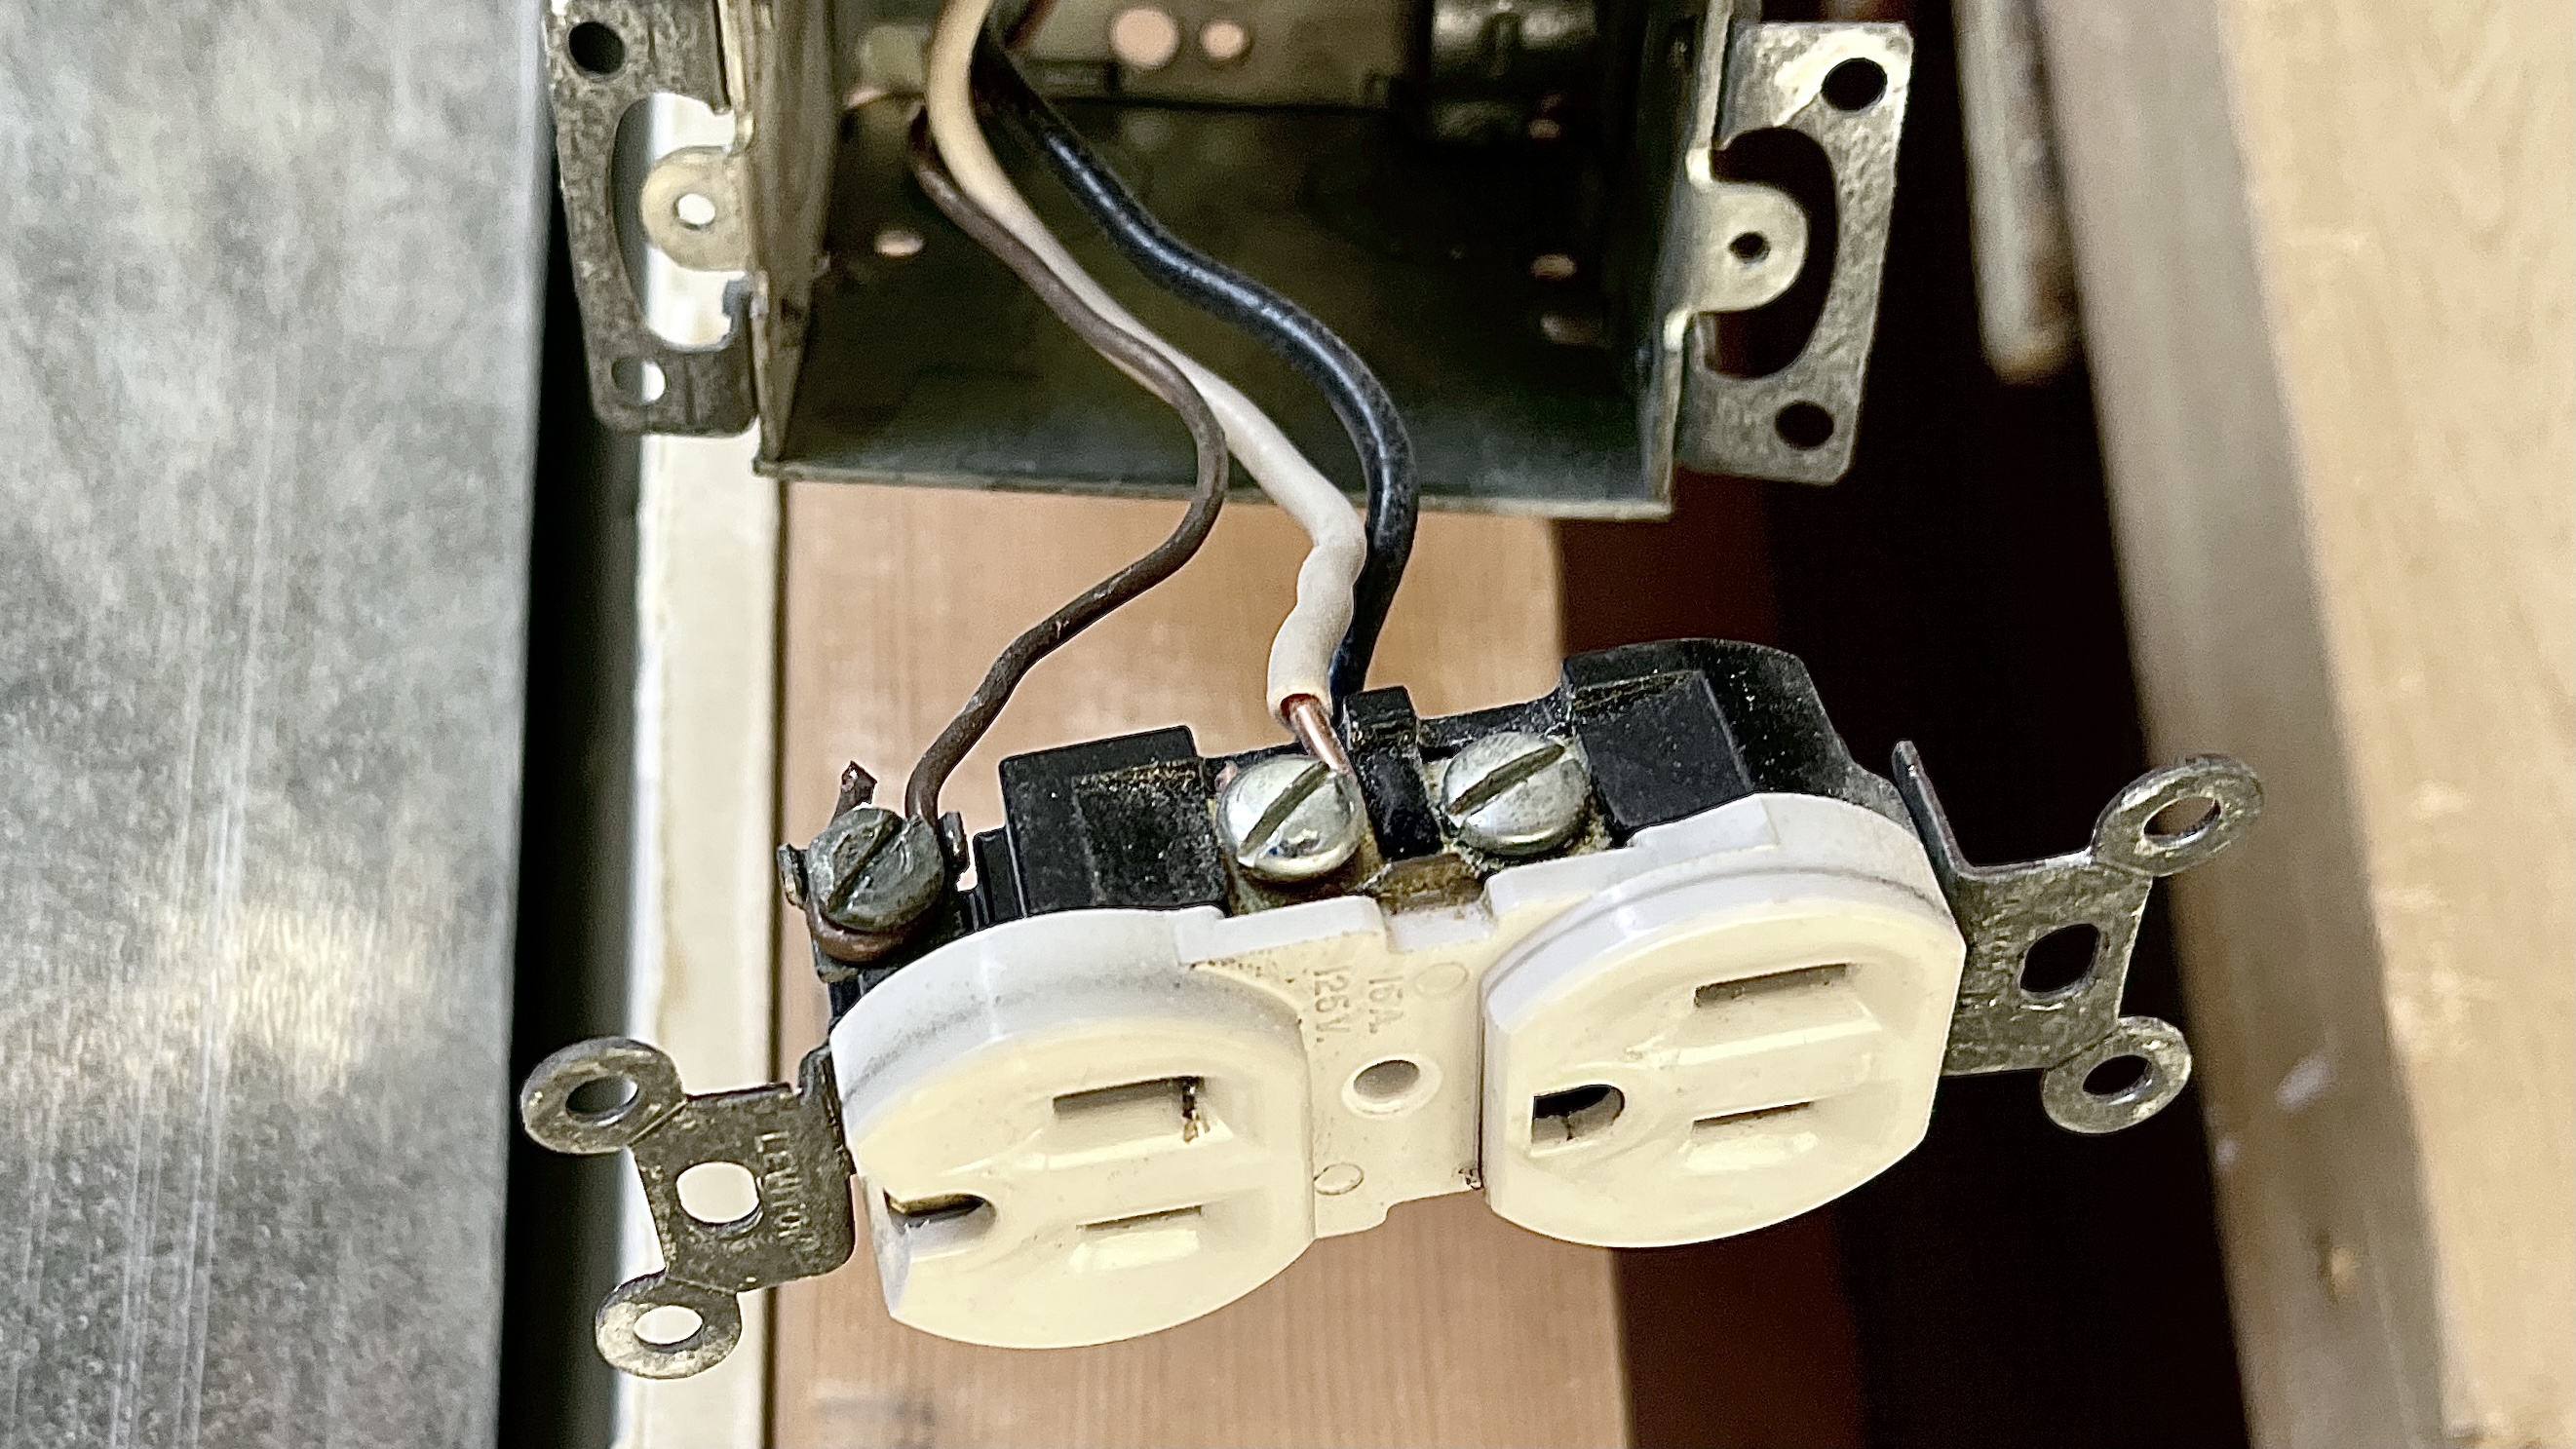 Diy Smart Home What S A Neutral Wire, How To Change A Light Switch Without Ground Wire